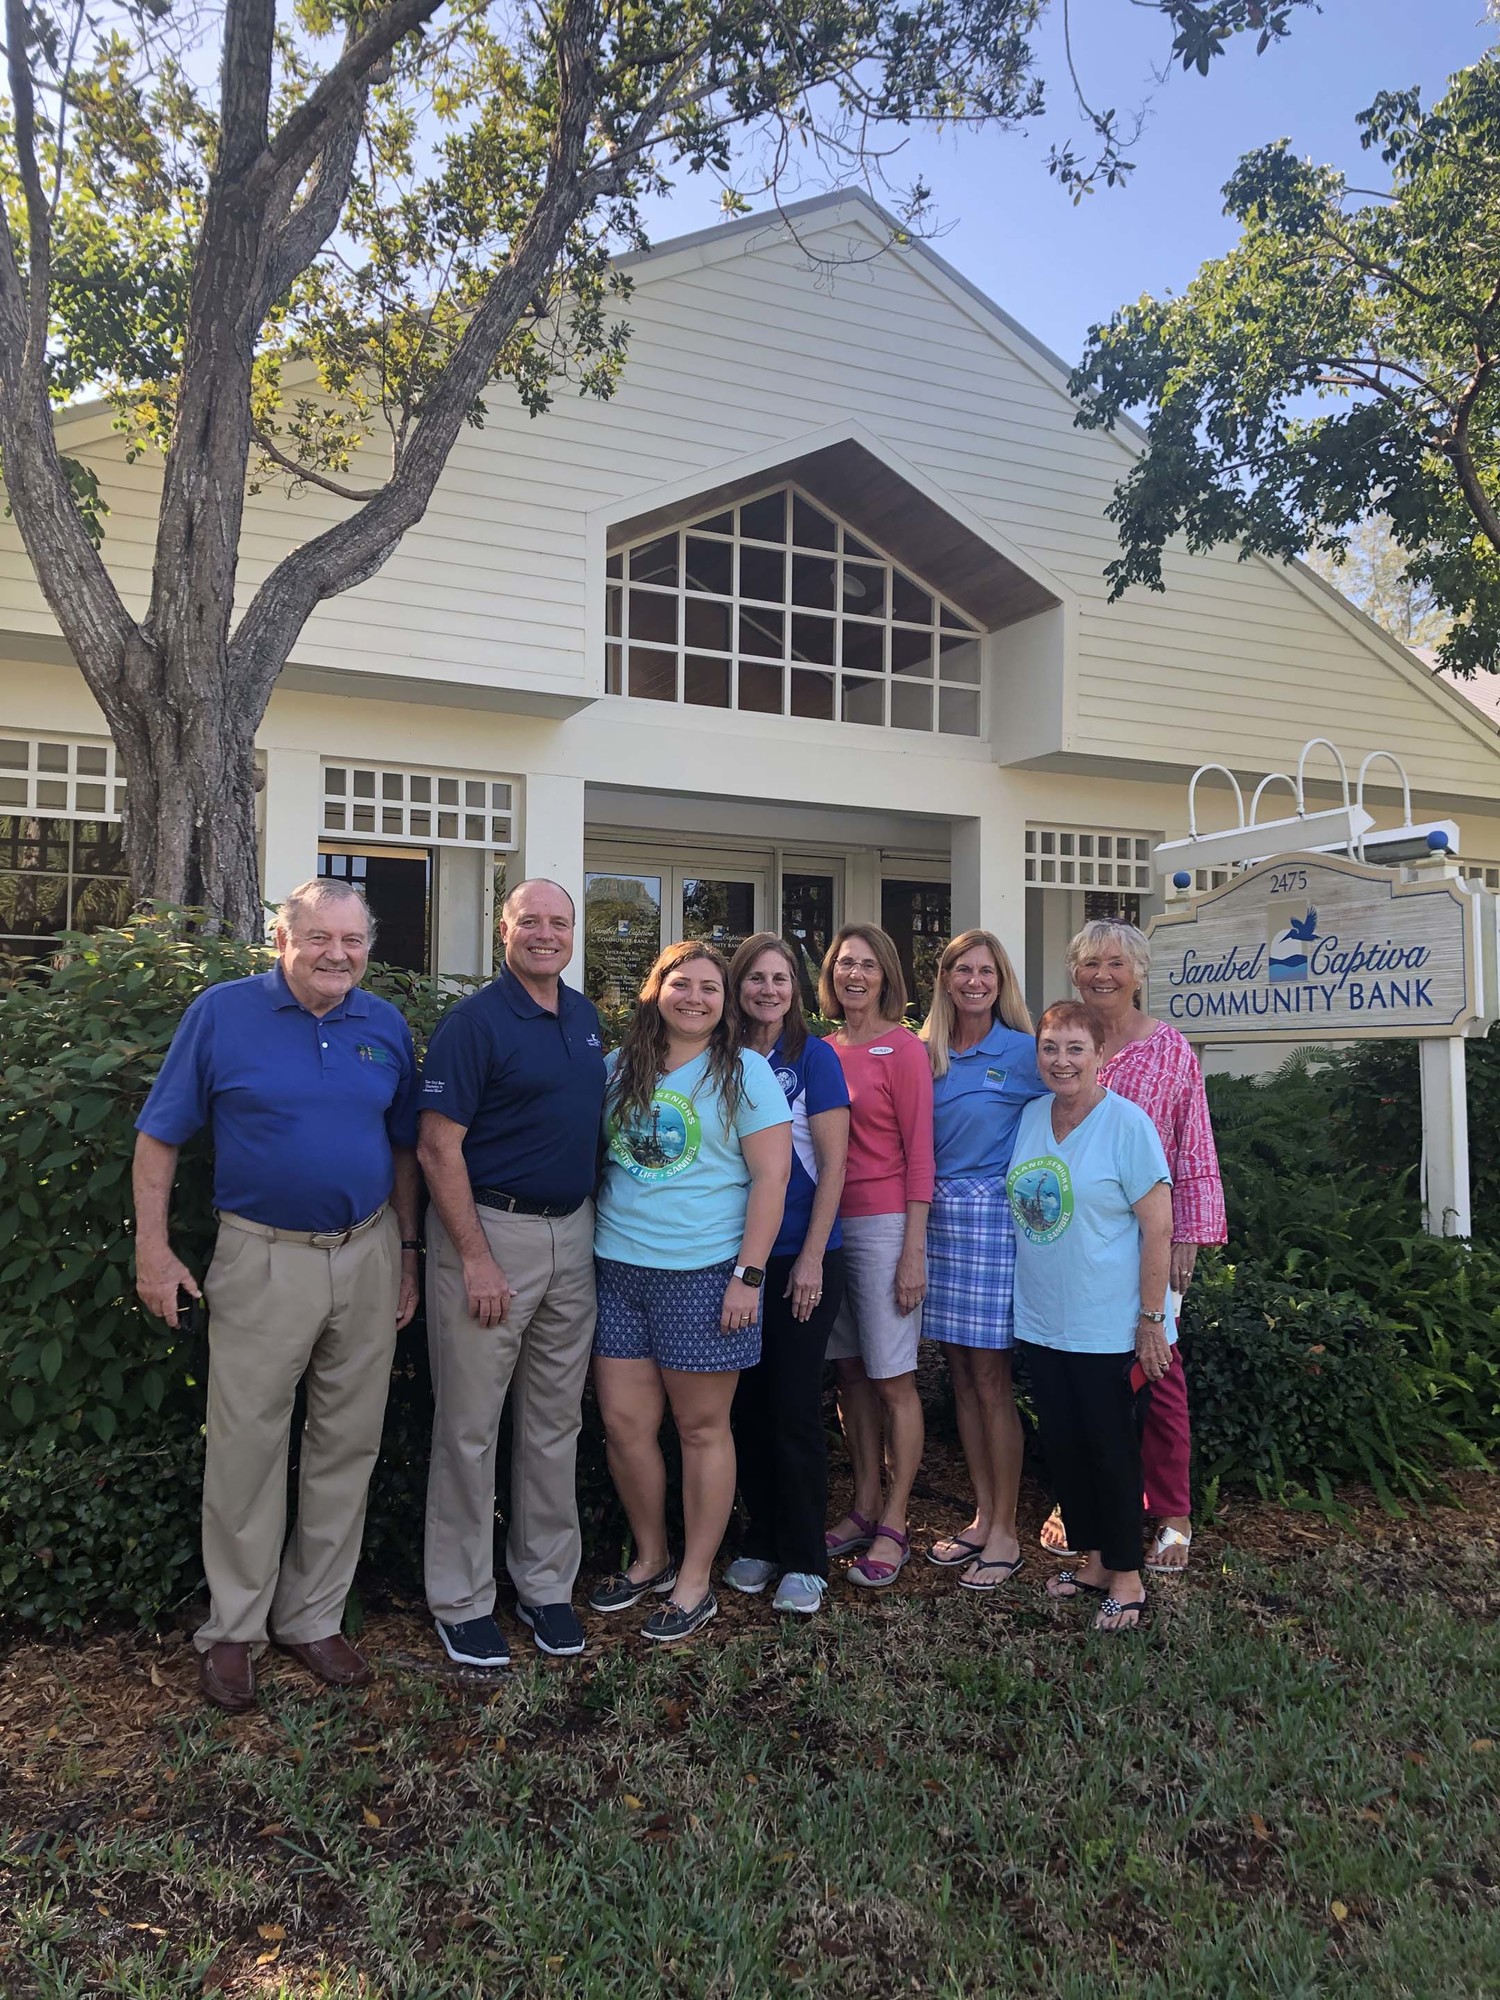 Courtesy. From left to right: Steve Brown, Craig Albert, Amy Esposito-Brown, Trish Phillips, Shirley Schulz, Melissa Rice, Lynn Quigley and Lena Brown in front of the current SCCB office.